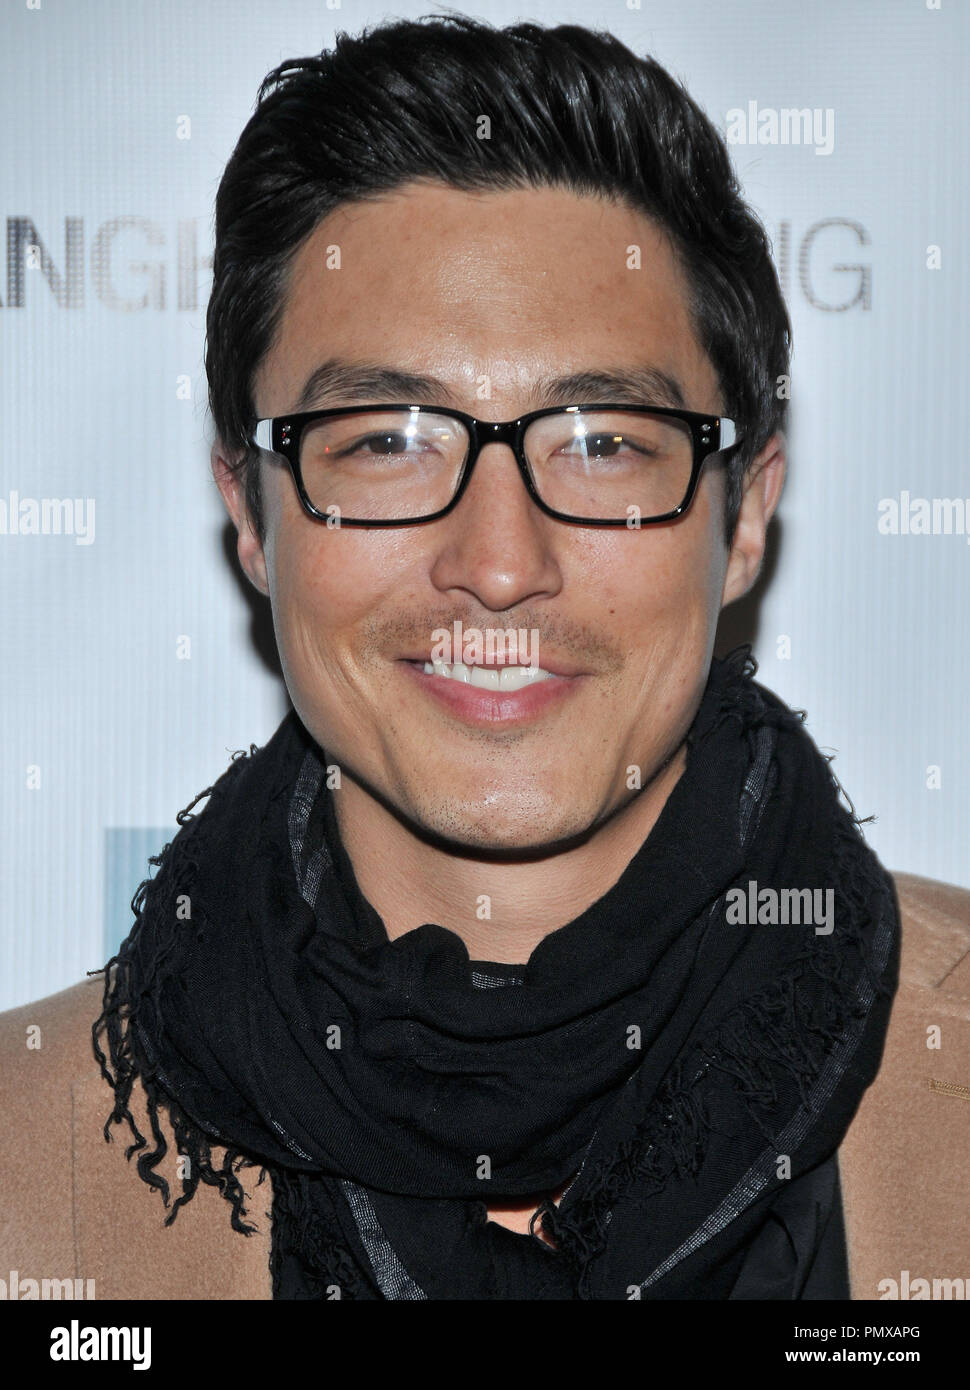 Daniel Henney at the 'Shanghai Calling' Los Angeles Premiere held at the TCL Chinese Theatre in Hollywood, CA.The event took place on Monday, Febuary 12, 2013. PRPP / PictureLux Stock Photo